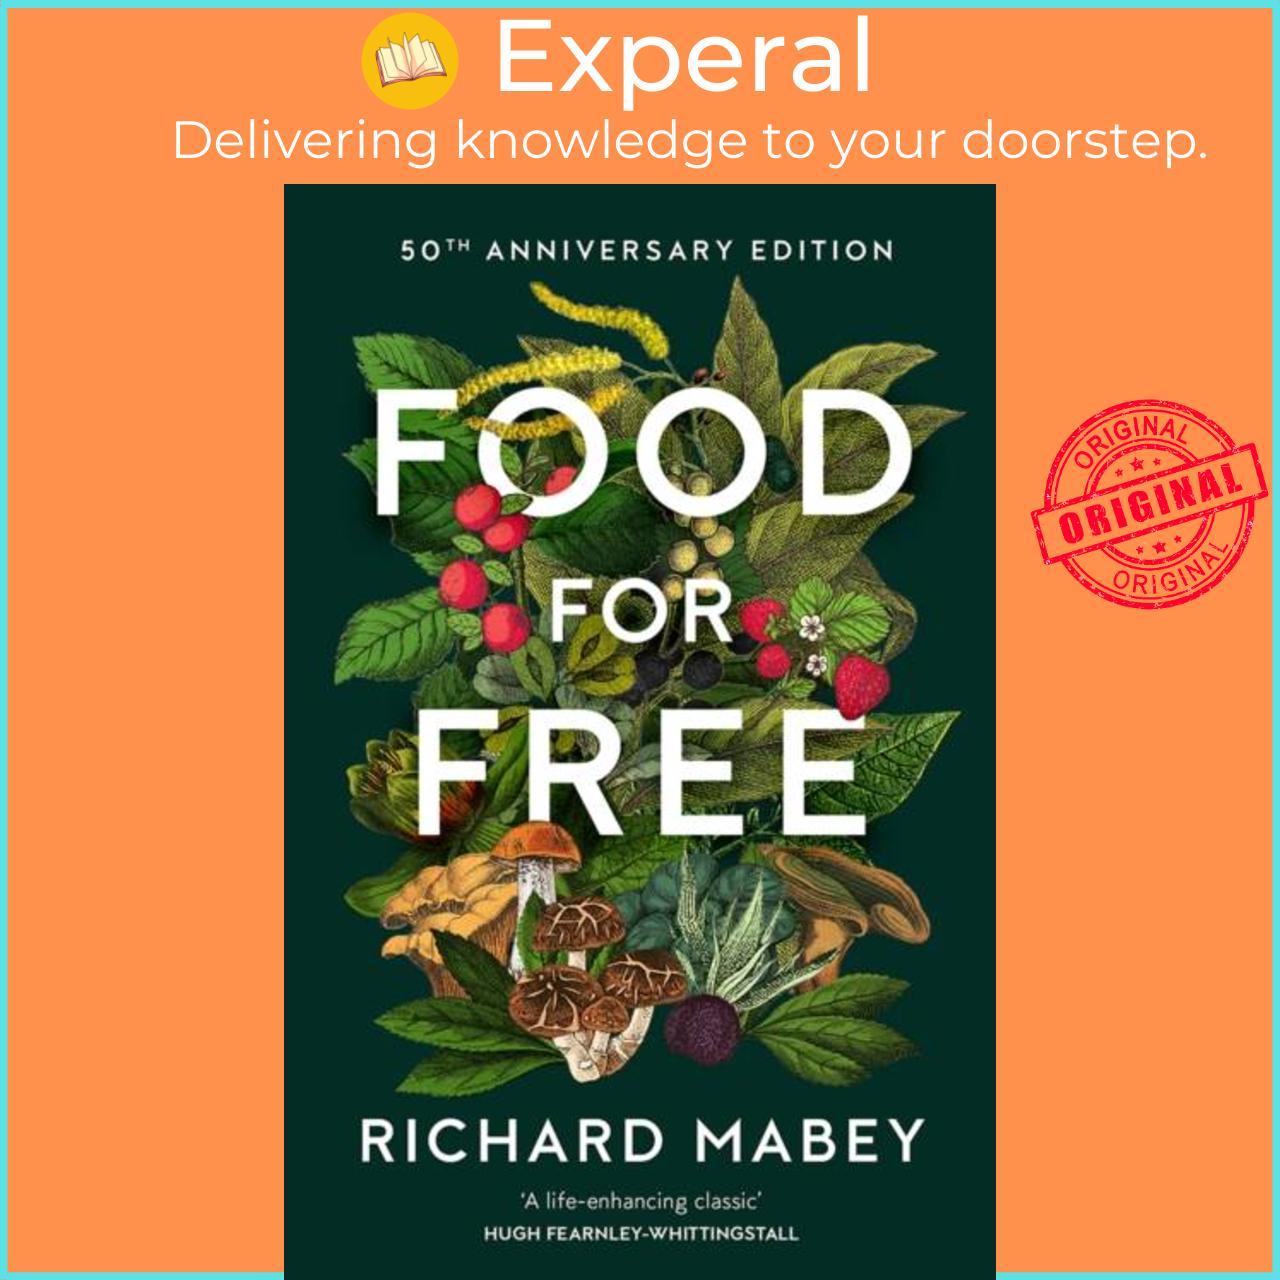 Sách - Food for Free - 50th Anniversary Edition by Richard Mabey (UK edition, hardcover)